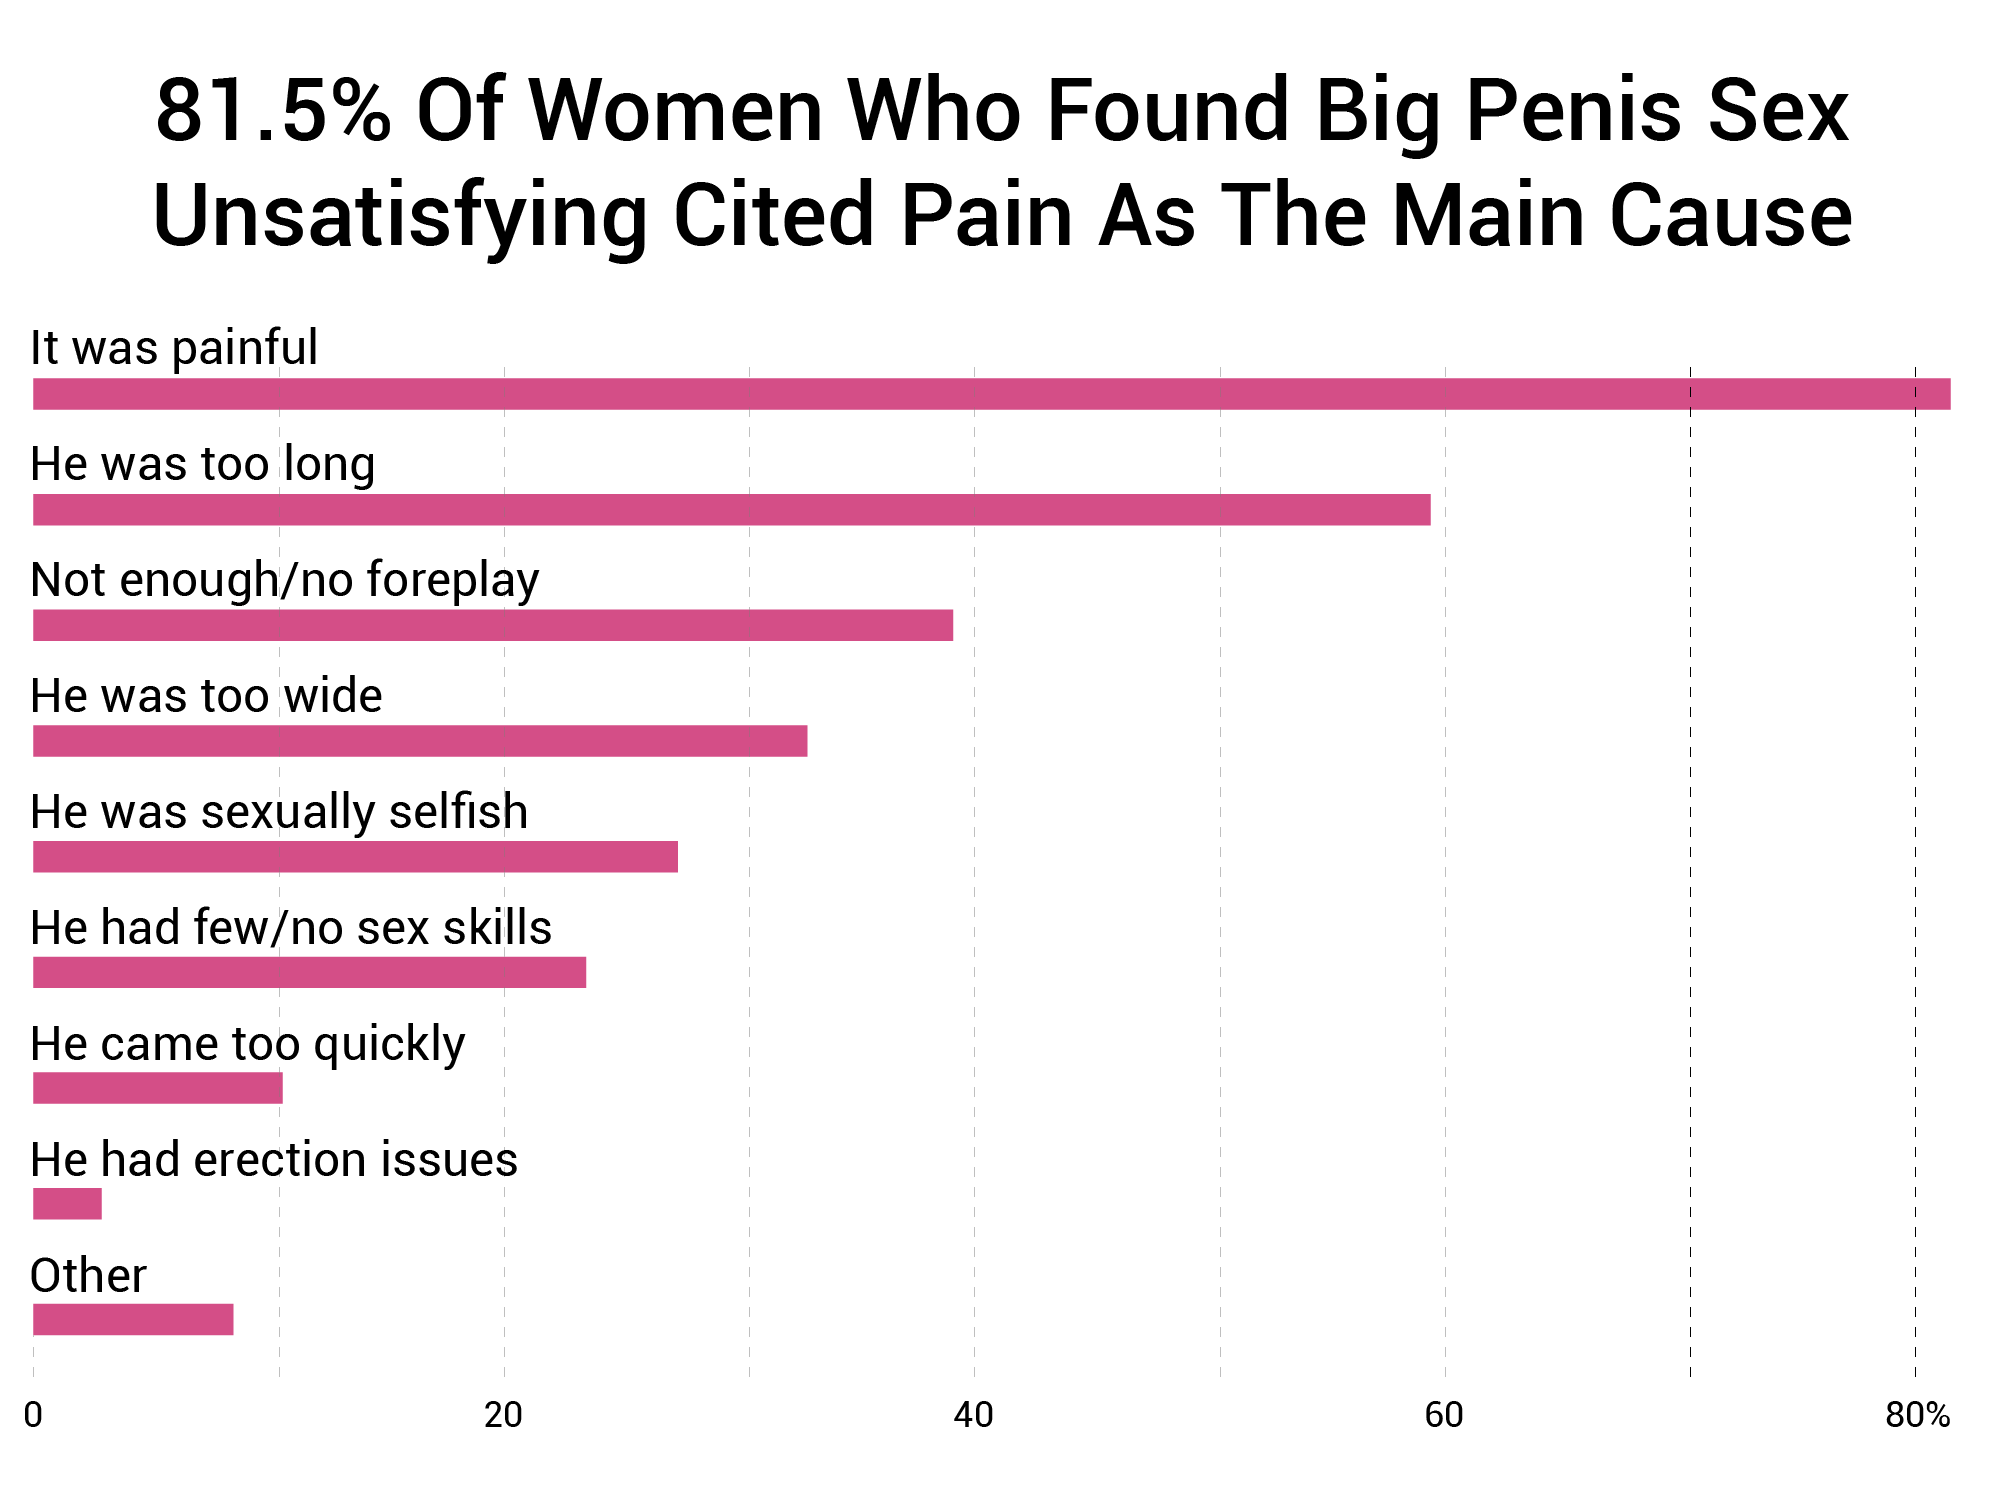 Does Size Matter? 91.7% Of Women Say It Does 1,387 Woman Study picture